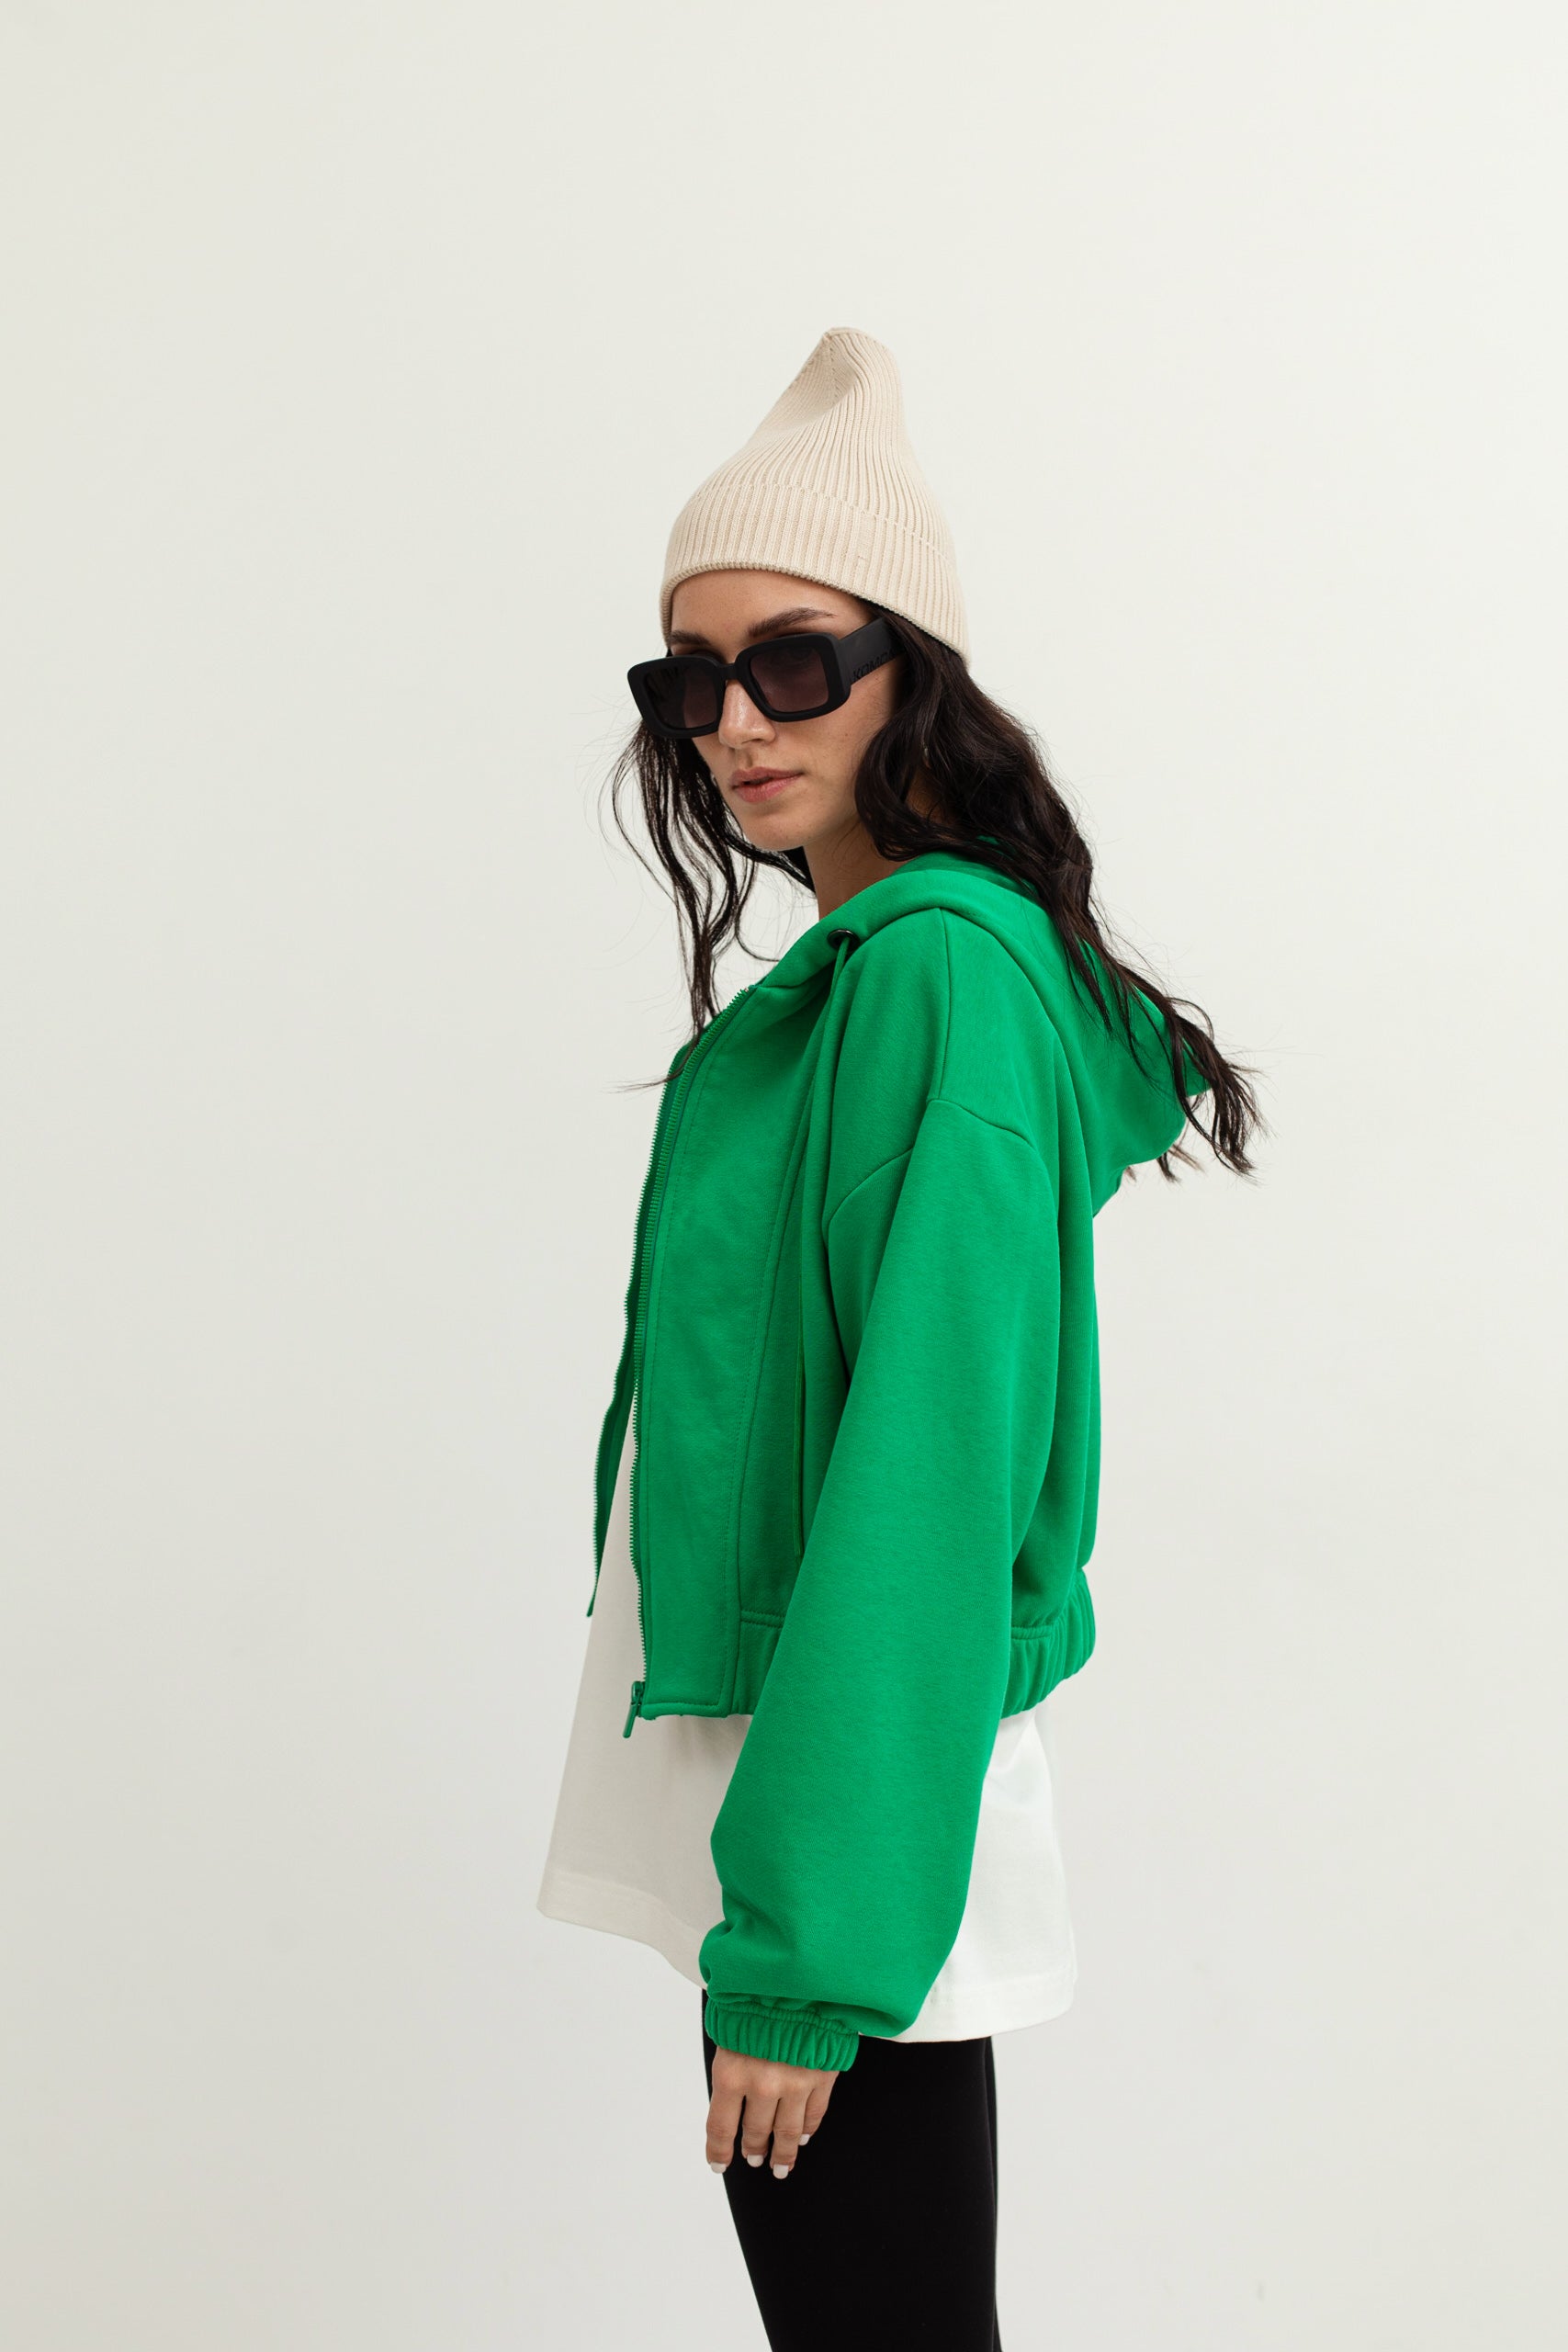 Short "Active" hoodie with a zipper in green color